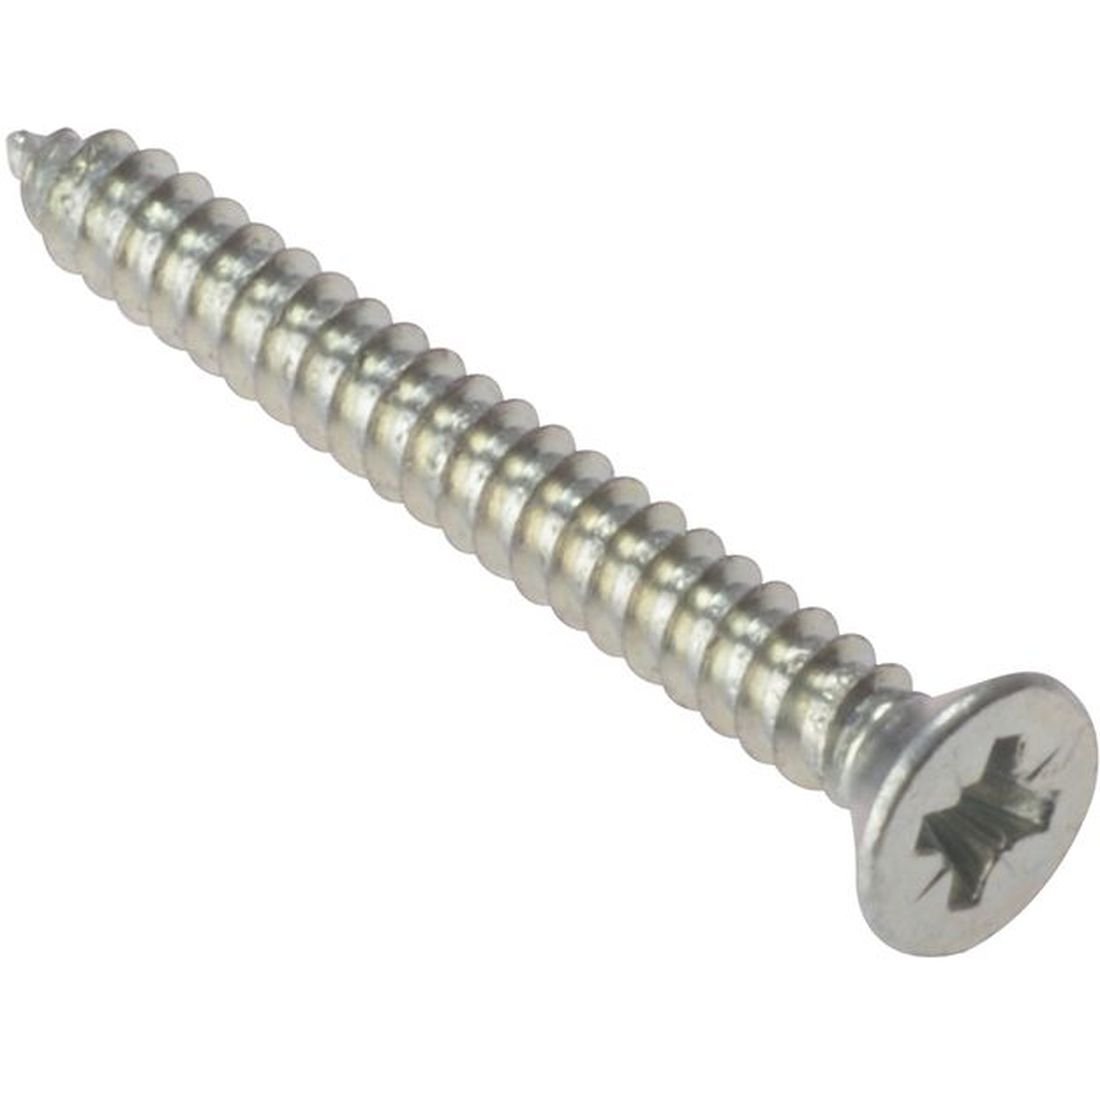 ForgeFix Self-Tapping Screw Pozi Compatible CSK ZP 3/4in x 8 Box 200                     